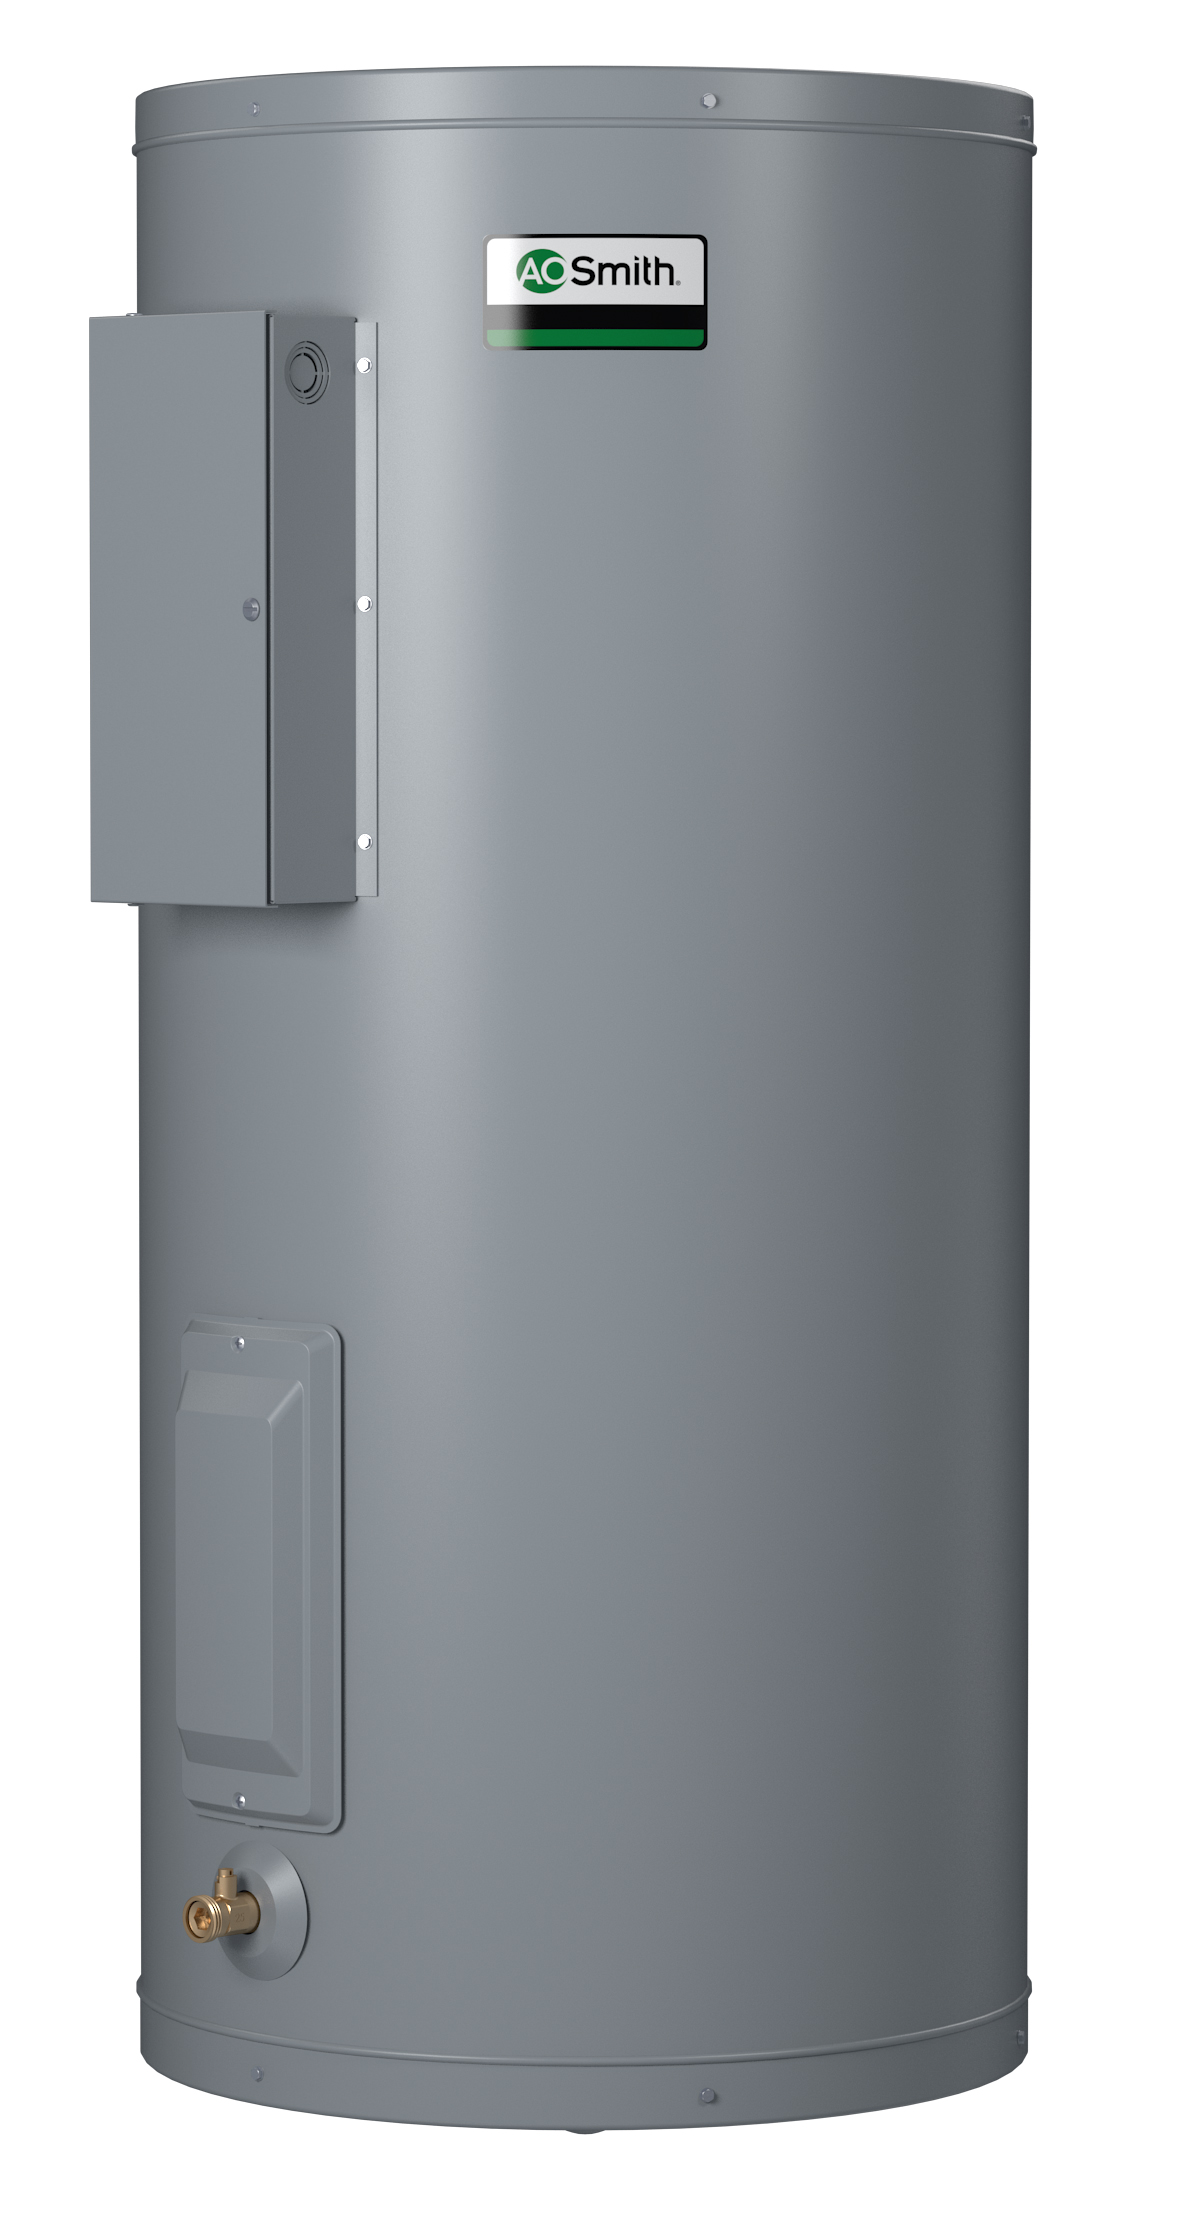 AO SMITH DEN-120D: 120 GALLONS, 1.5KW, 208 VOLT, 3 PHASE, (2-1500 WATT ELEMENTS, NON-SIMULTANEOUS WIRING), DURA-POWER, LIGHT DUTY COMMERCIAL ELECTRIC WATER HEATER